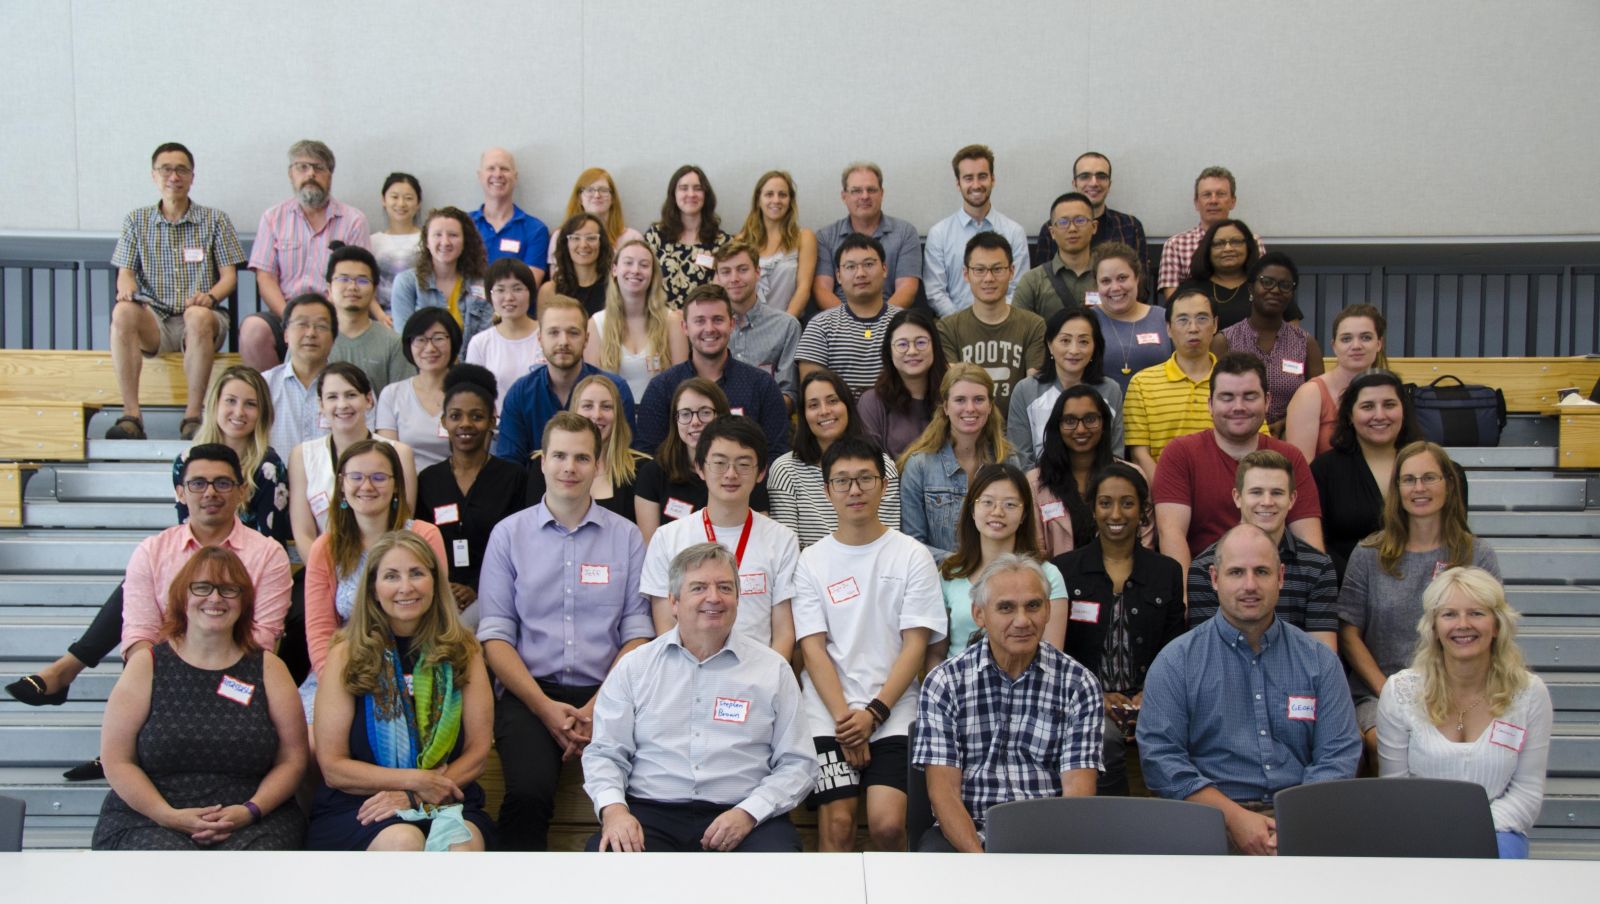 "A group photo of LEADERS summer symposium attendees"